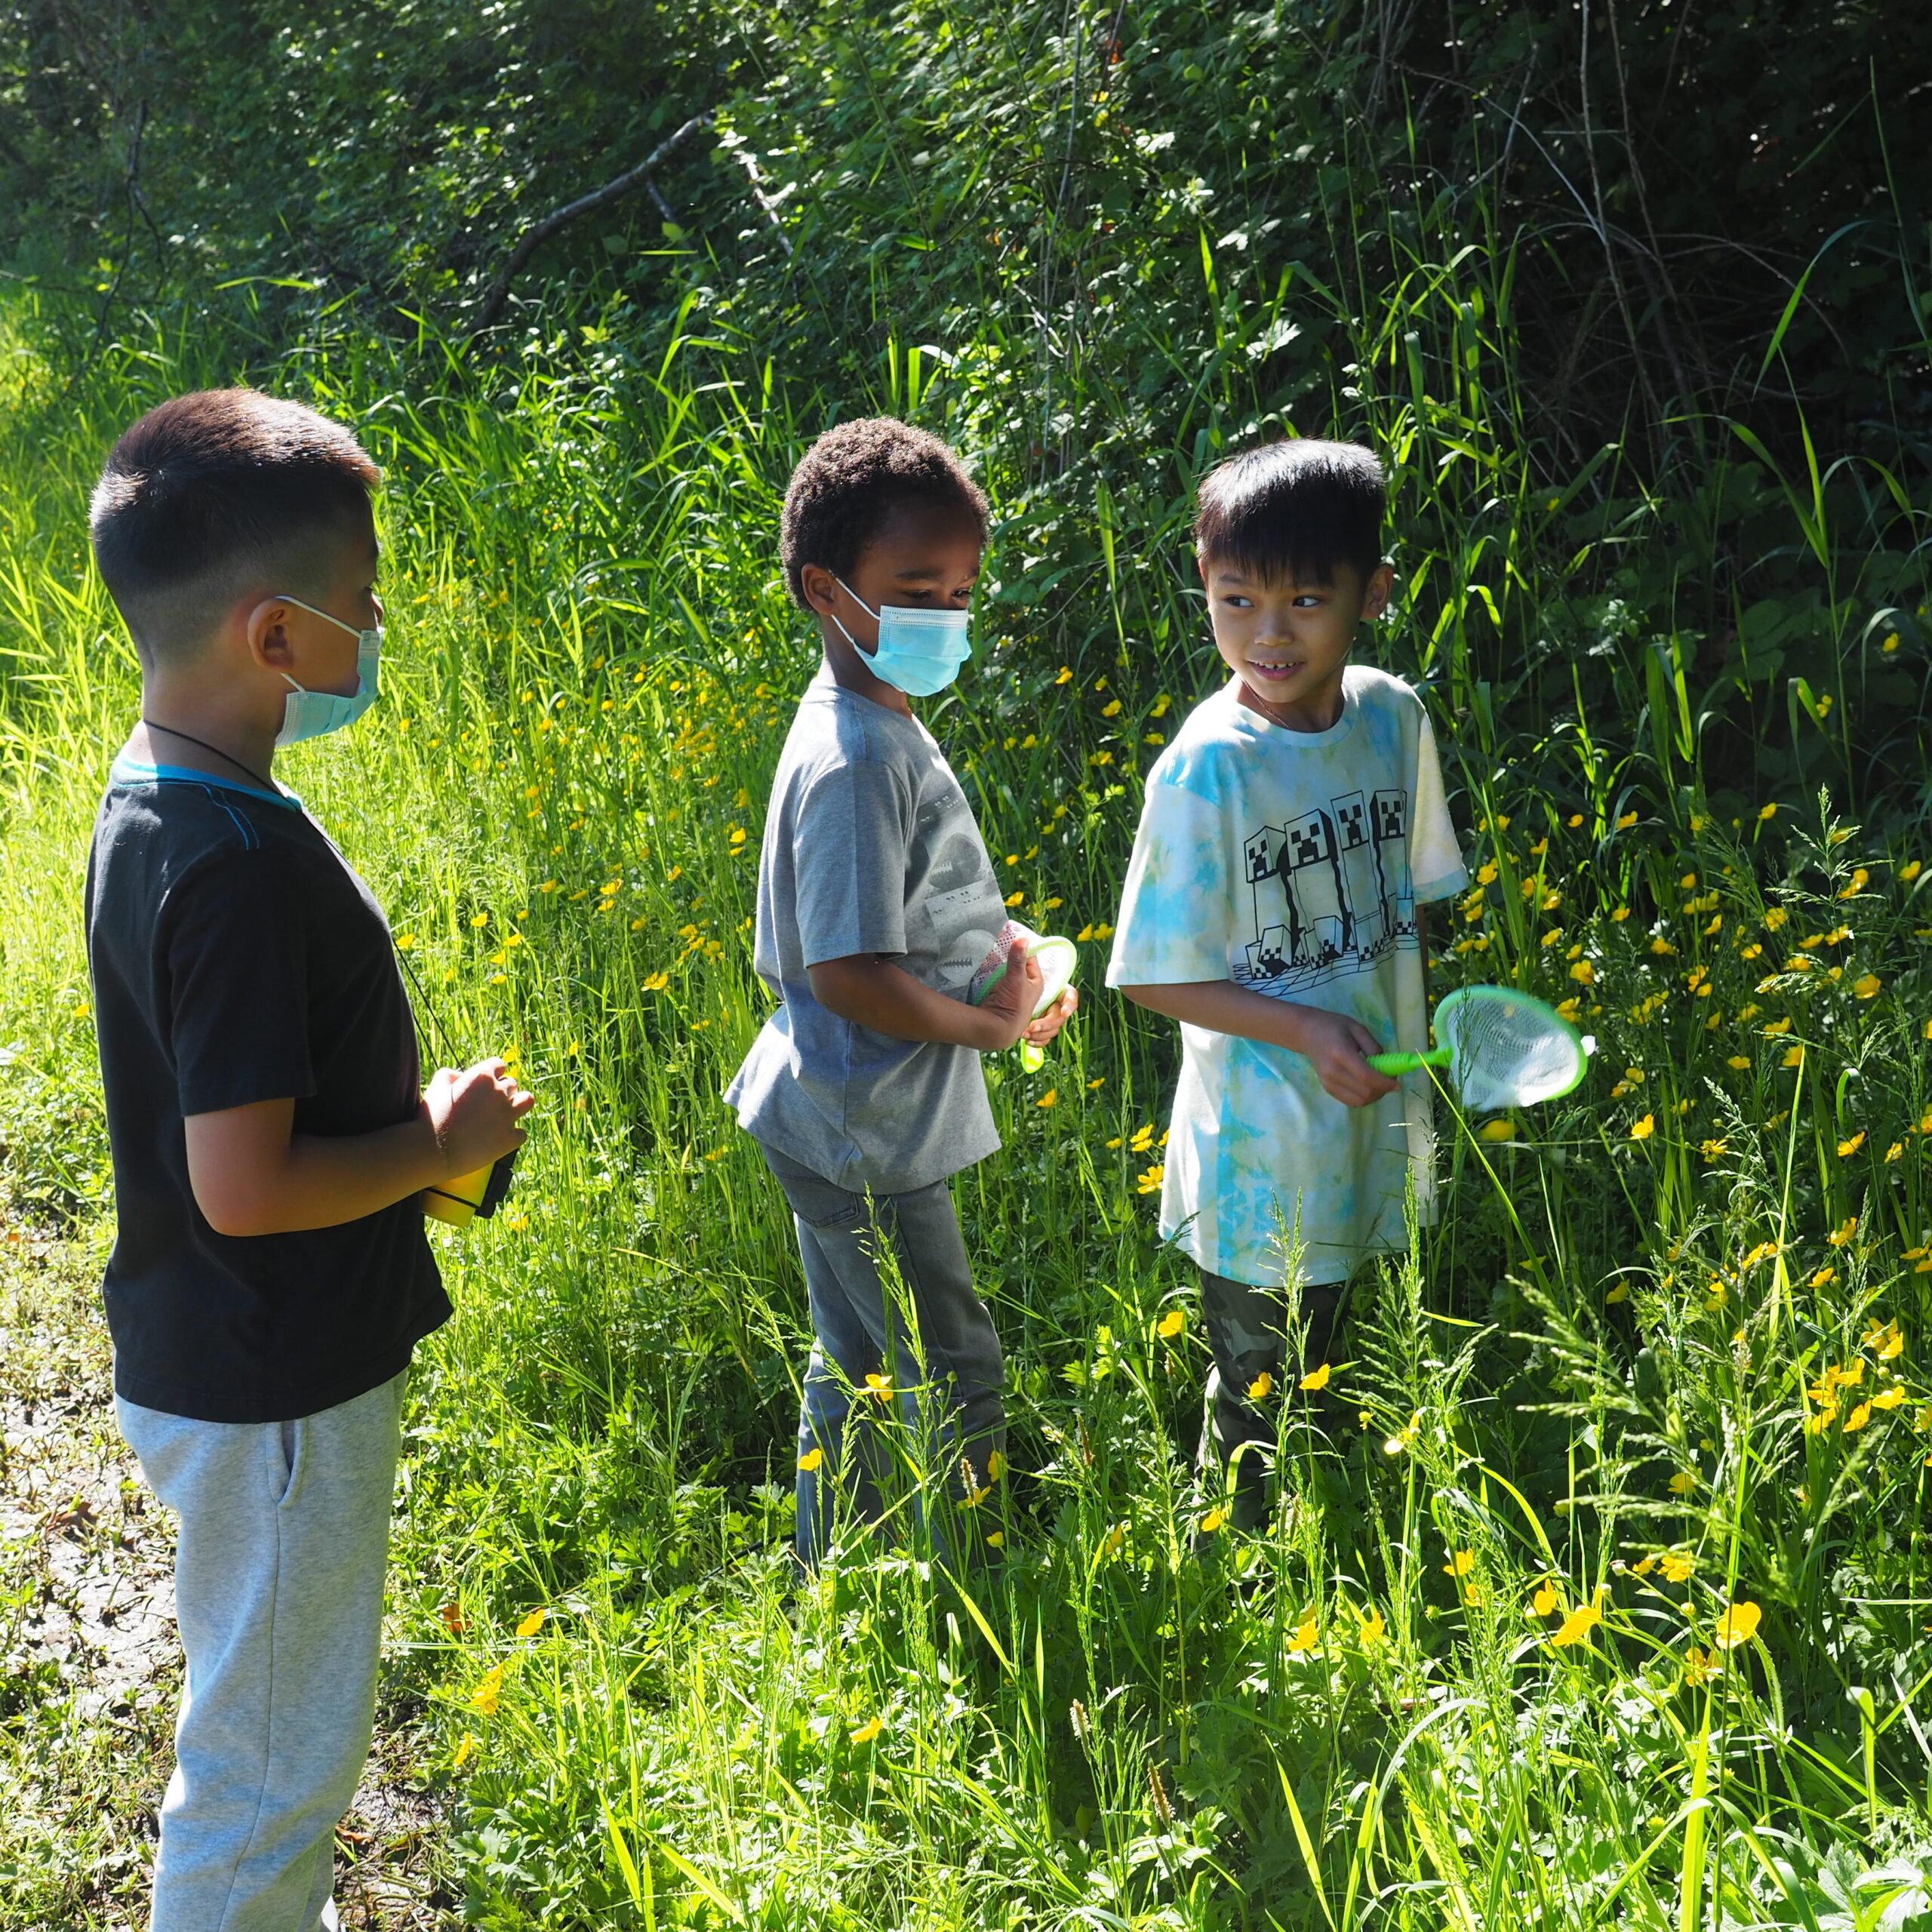 3 students stand in grass near their playground looking for pollinators